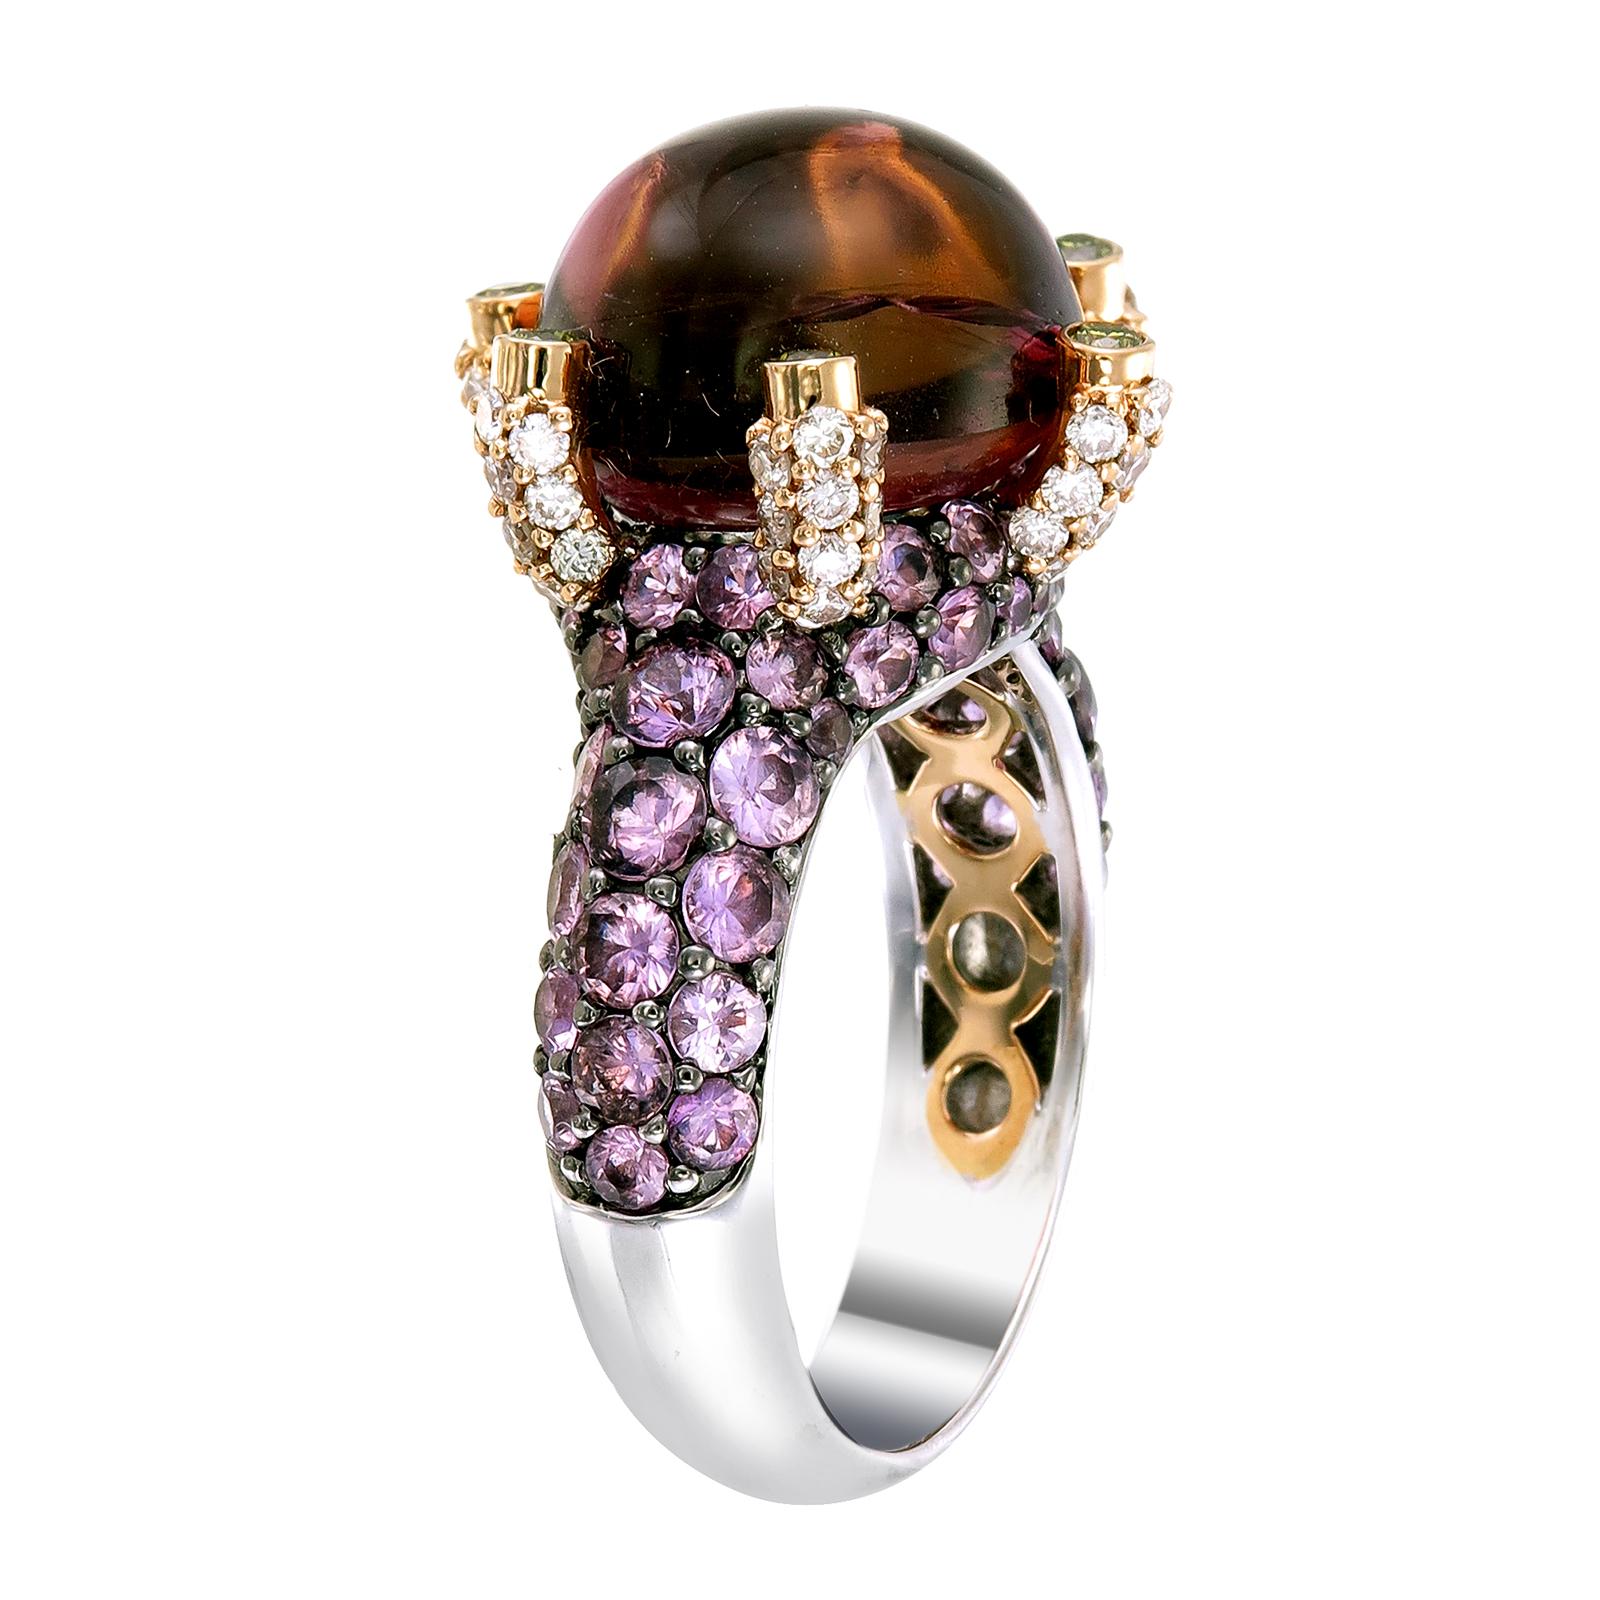 A 10.40-carat round Pink Tourmaline sits high like a colorful crystal ball on a 18k gold and palladium ring protected by 0.14-carat Yellow Diamonds. The ring’s surface is paved with 2.70-carat of Pink Sapphire and 0.59-carat of White Diamonds.